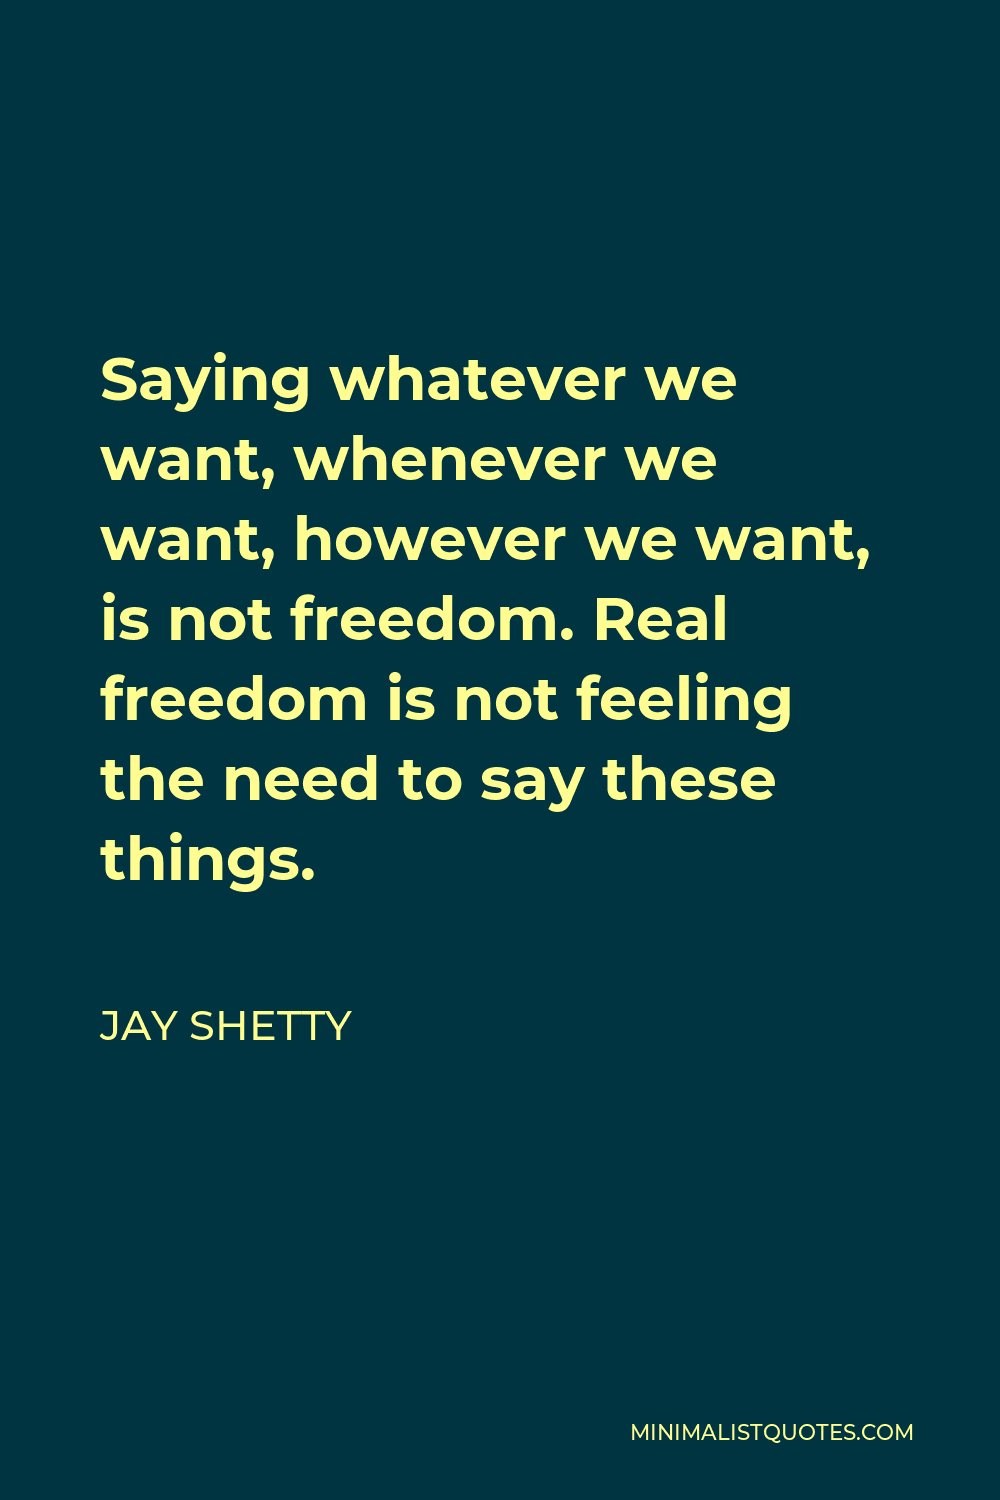 Jay Shetty Quote - Saying whatever we want, whenever we want, however we want, is not freedom. Real freedom is not feeling the need to say these things.